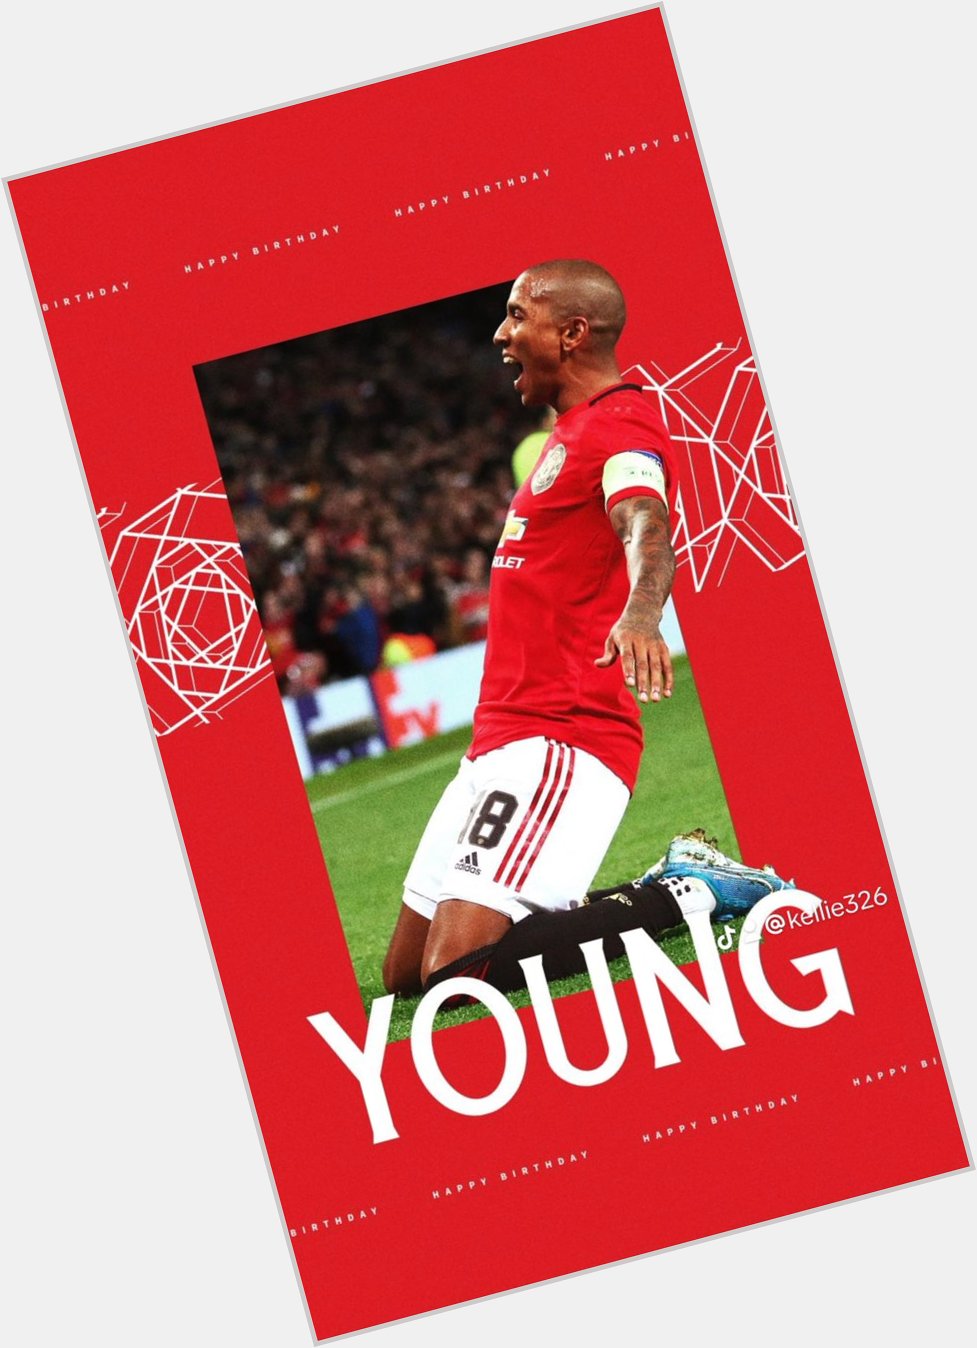 Happy birthday to former Manchester United player Ashley young    